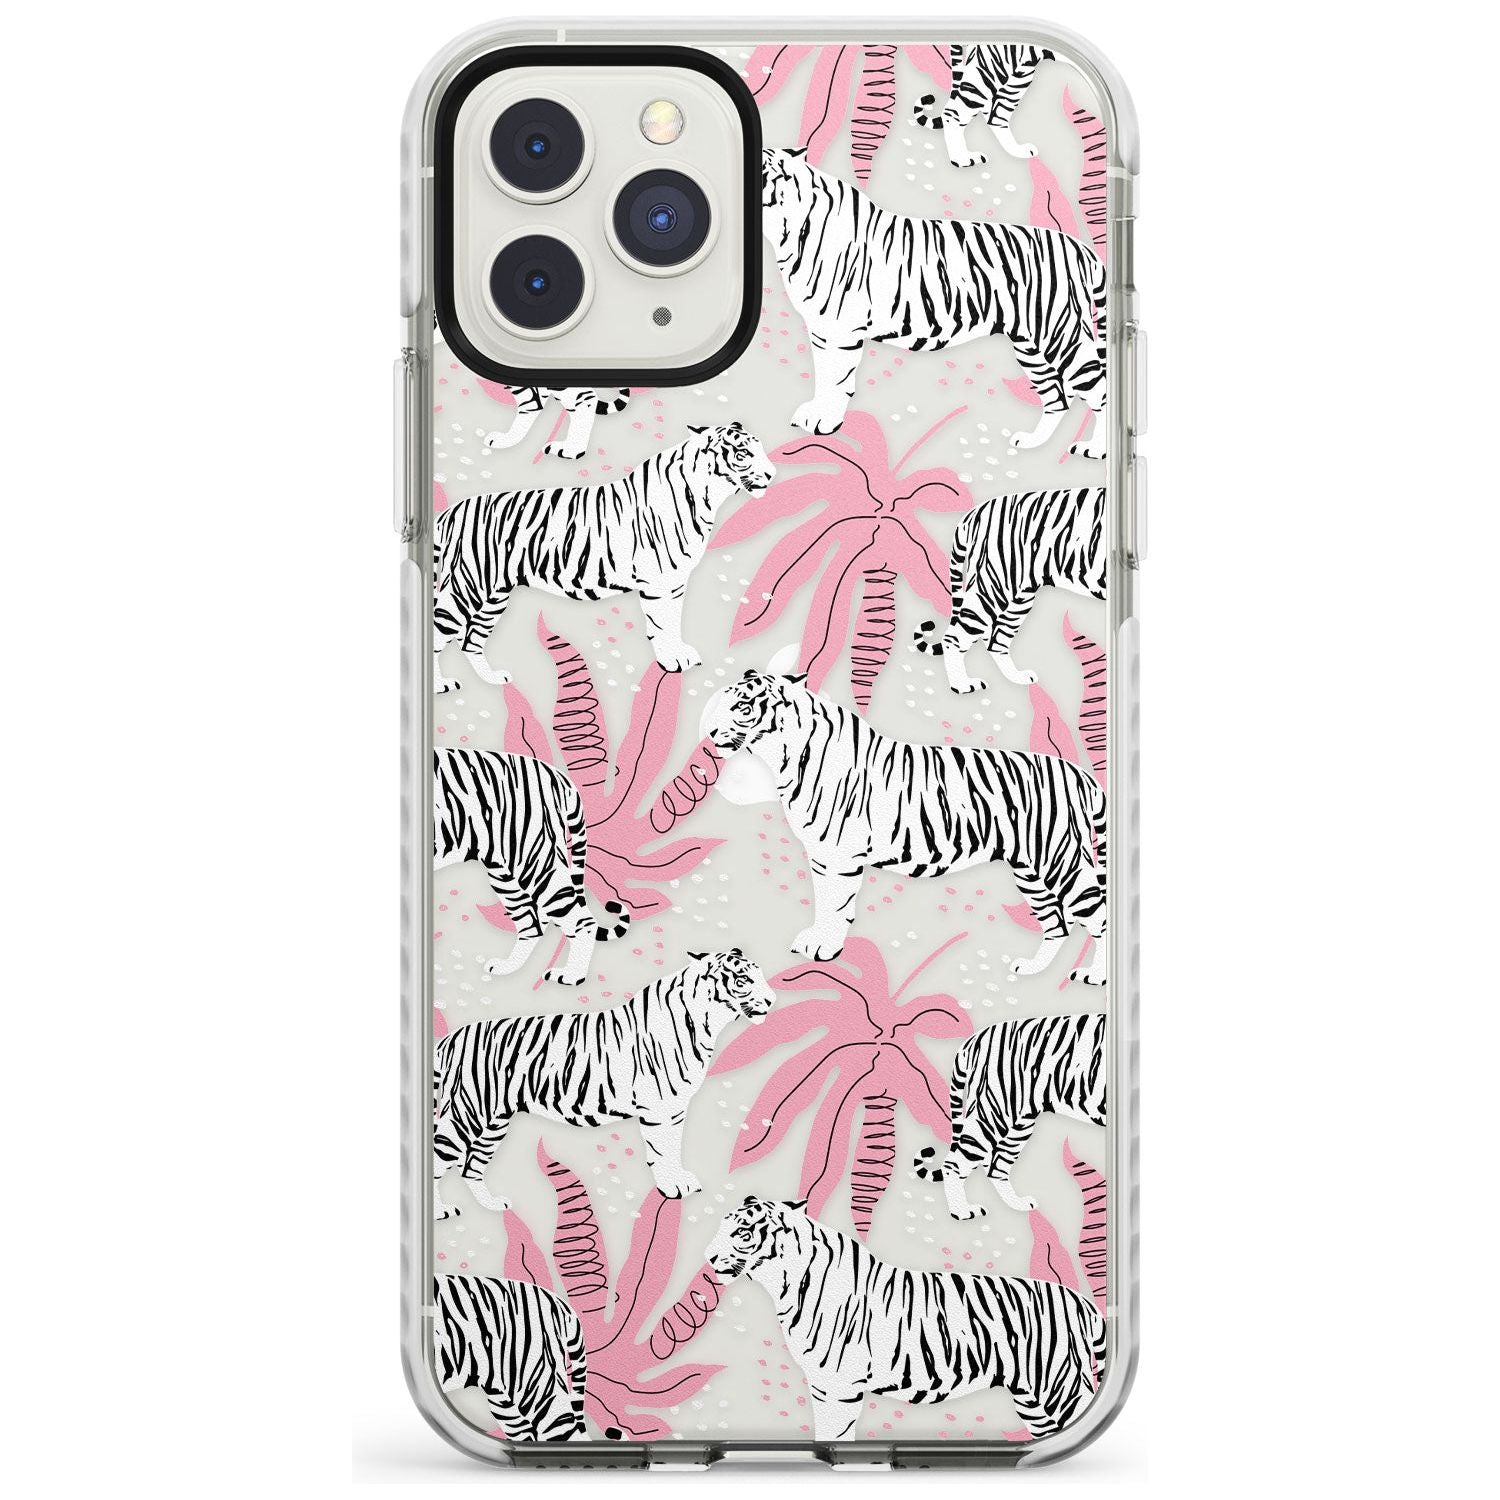 Tigers Within Impact Phone Case for iPhone 11 Pro Max